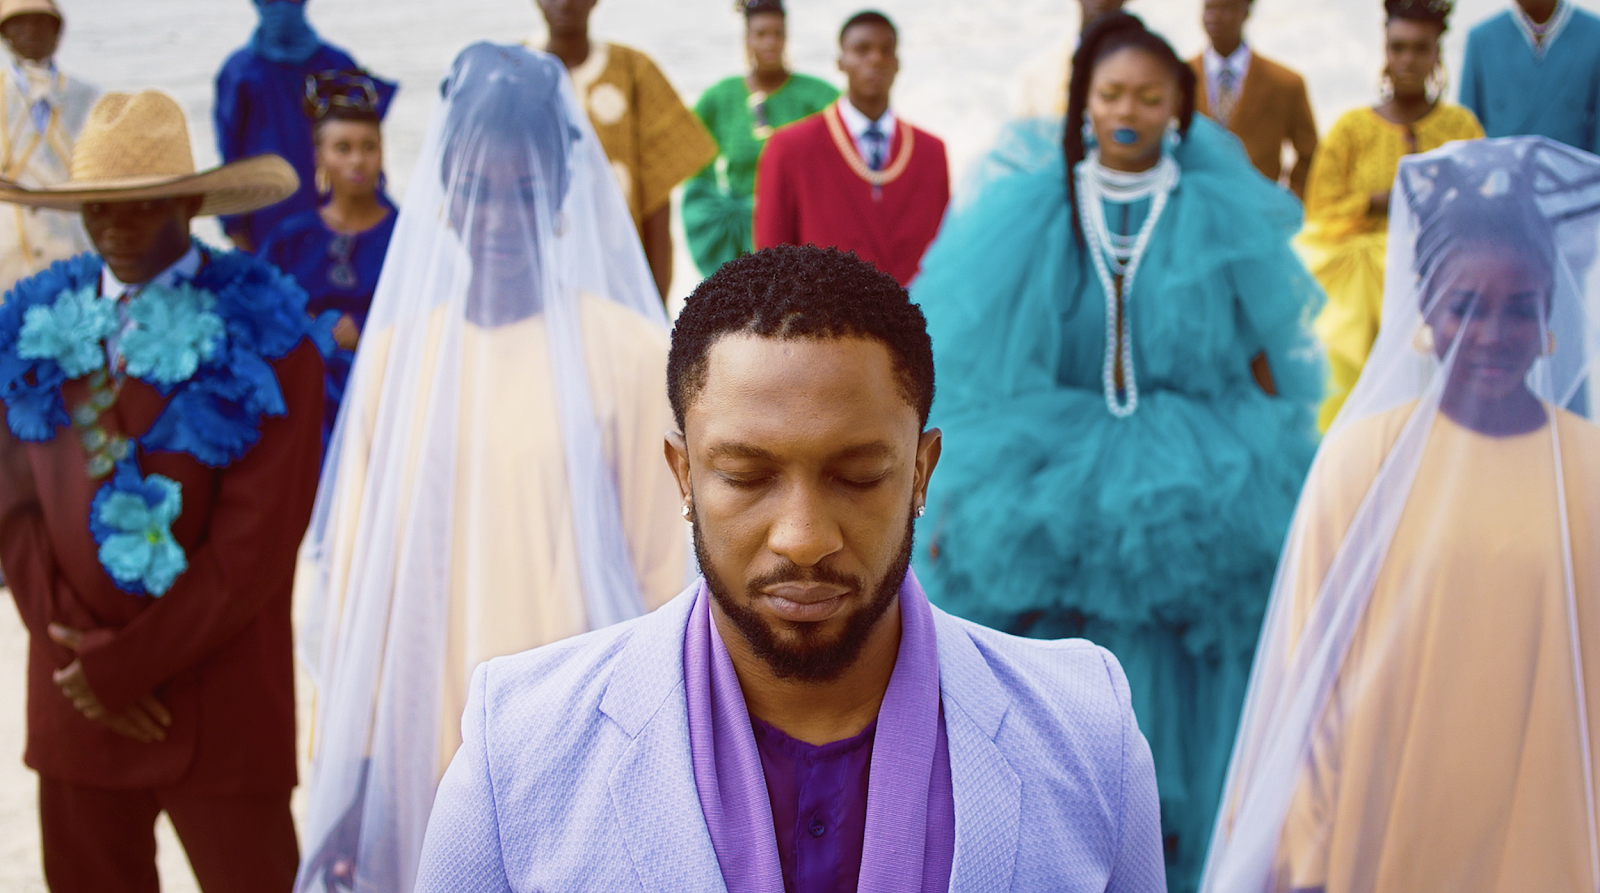 Darey reveals uplifting new single ‘Jah Guide Me’ with powerful visual